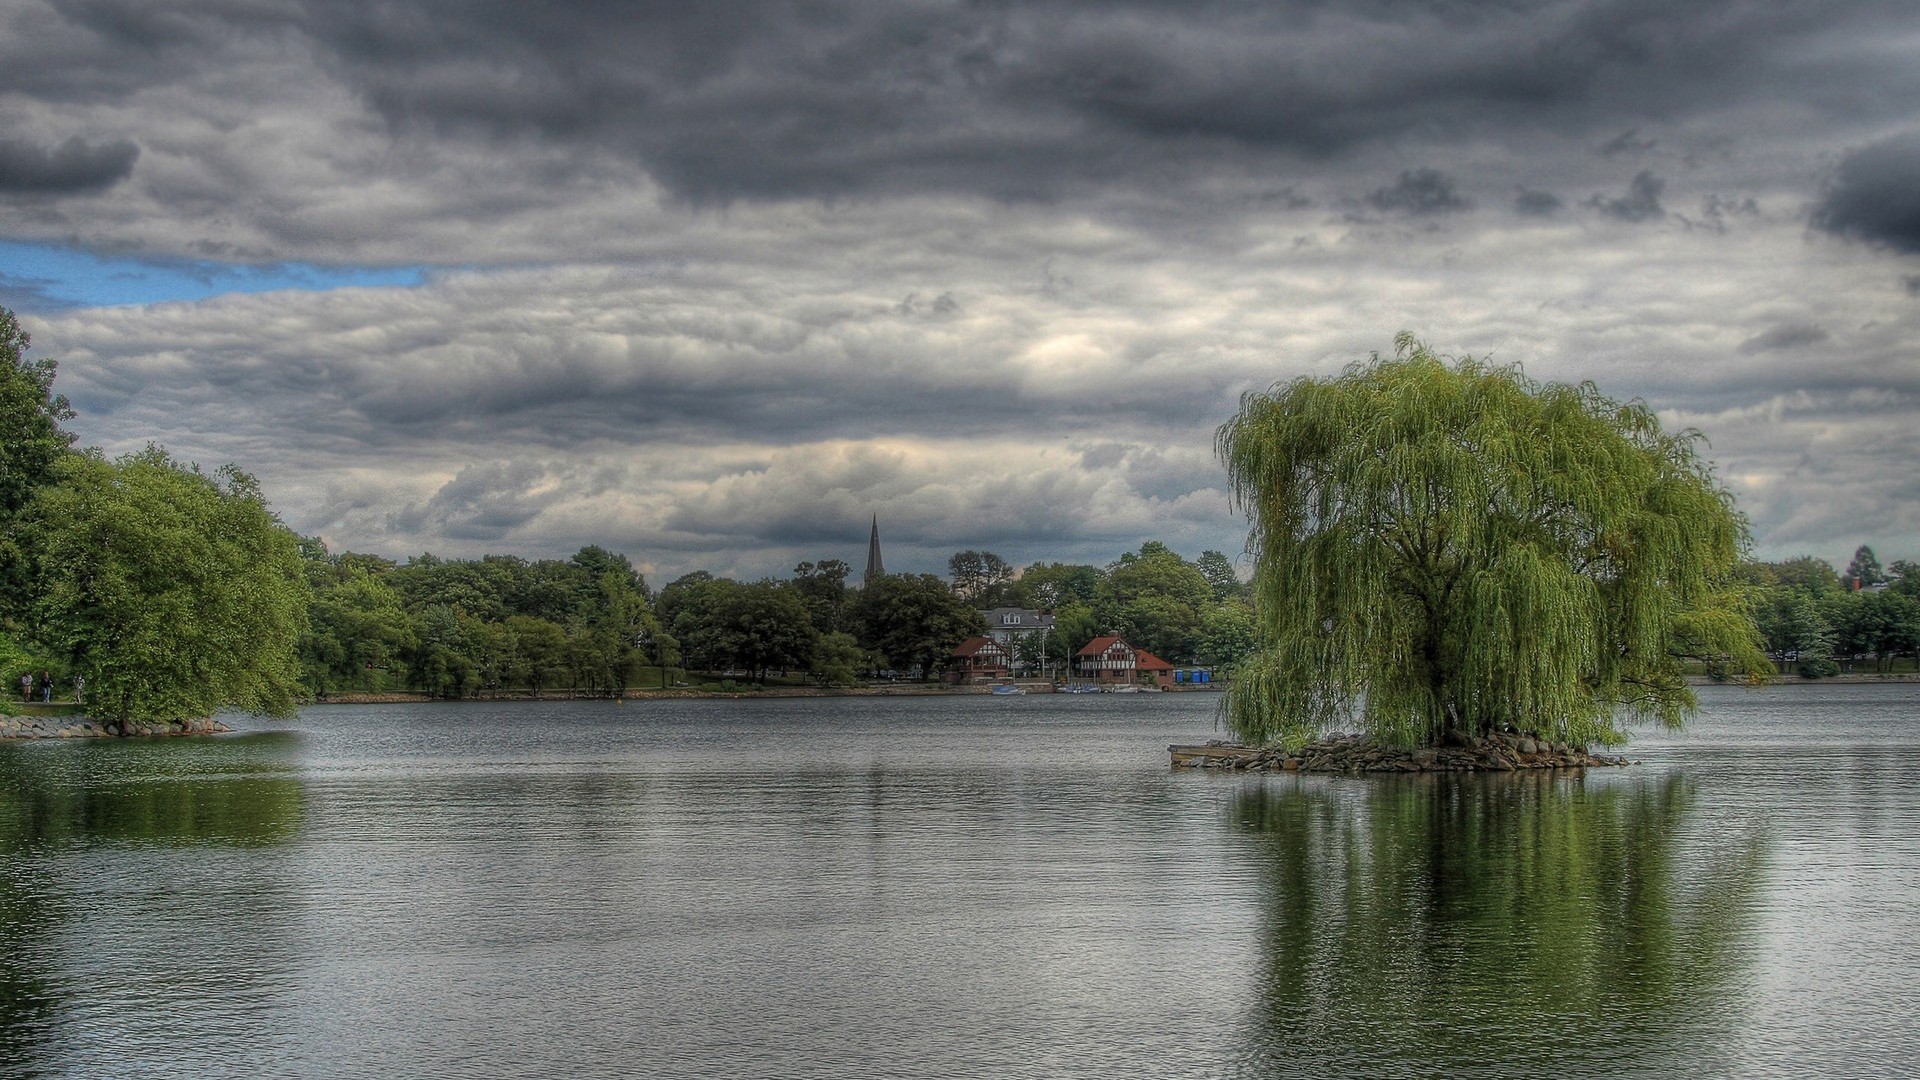 General 1920x1080 landscape HDR willow trees willows lake island water reflection clouds